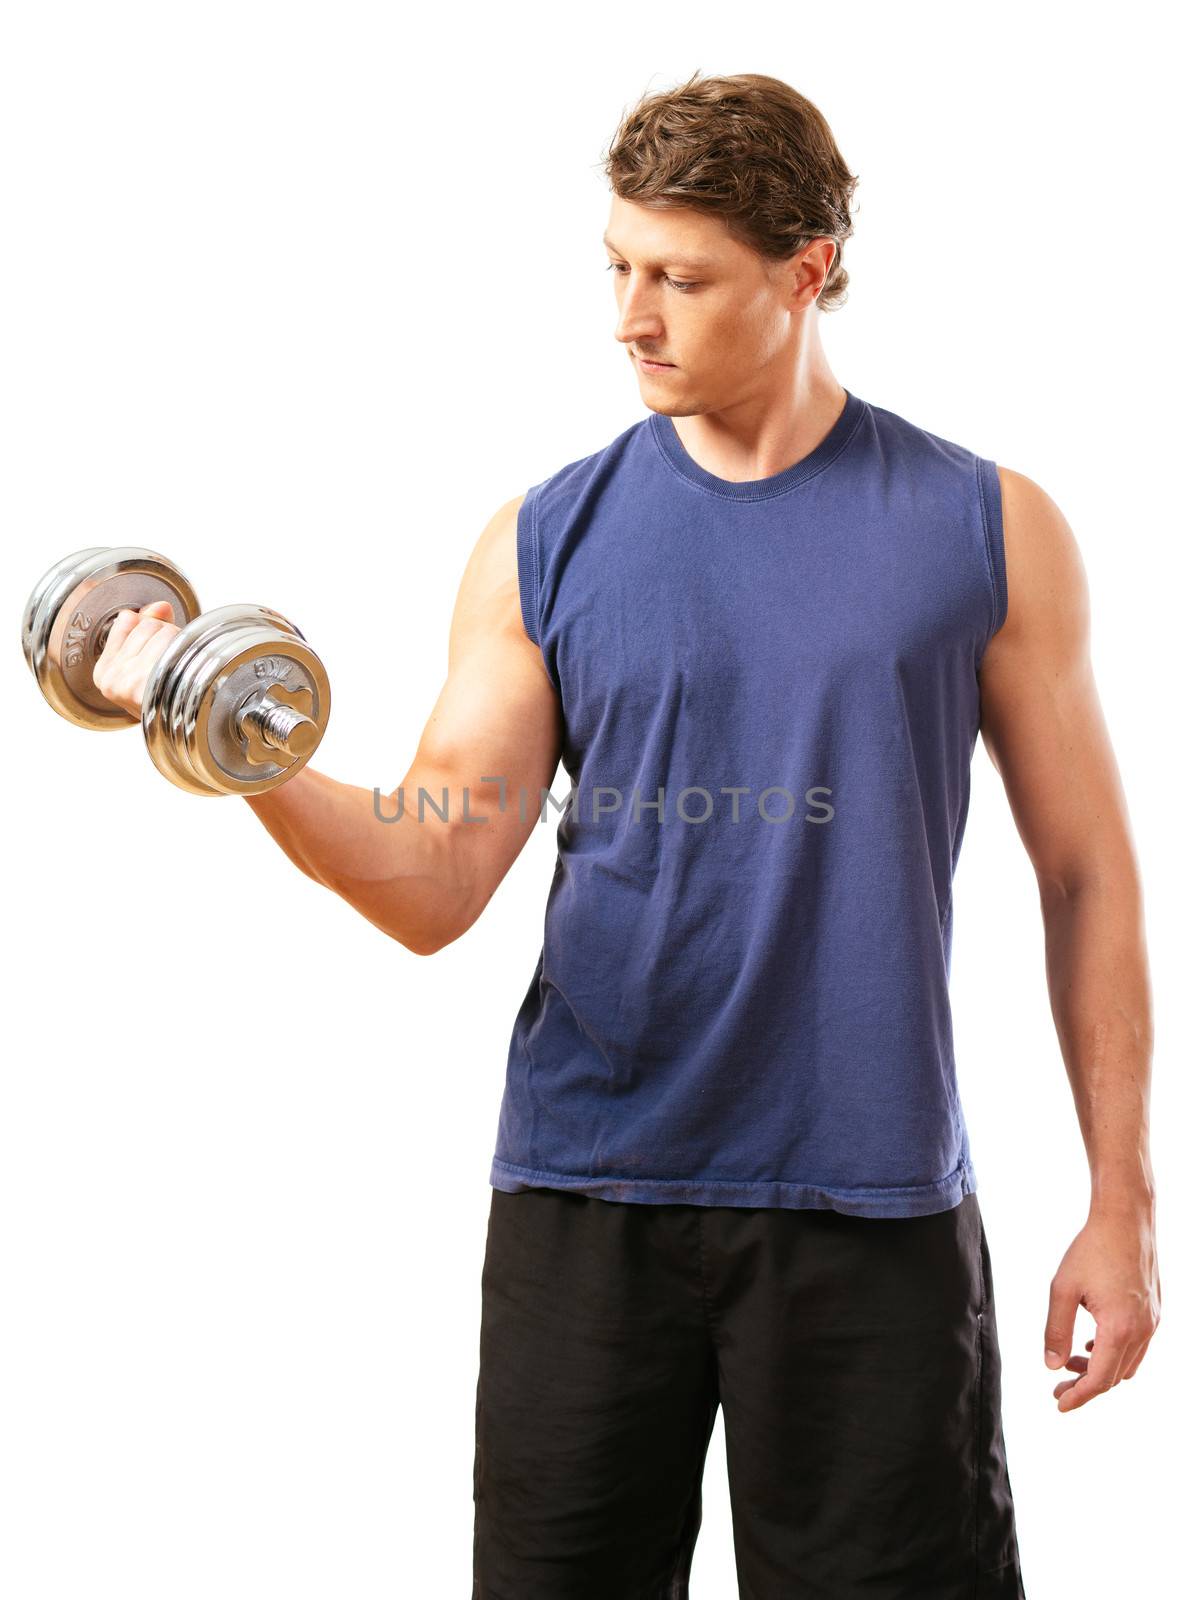 One arm bicep curl by sumners